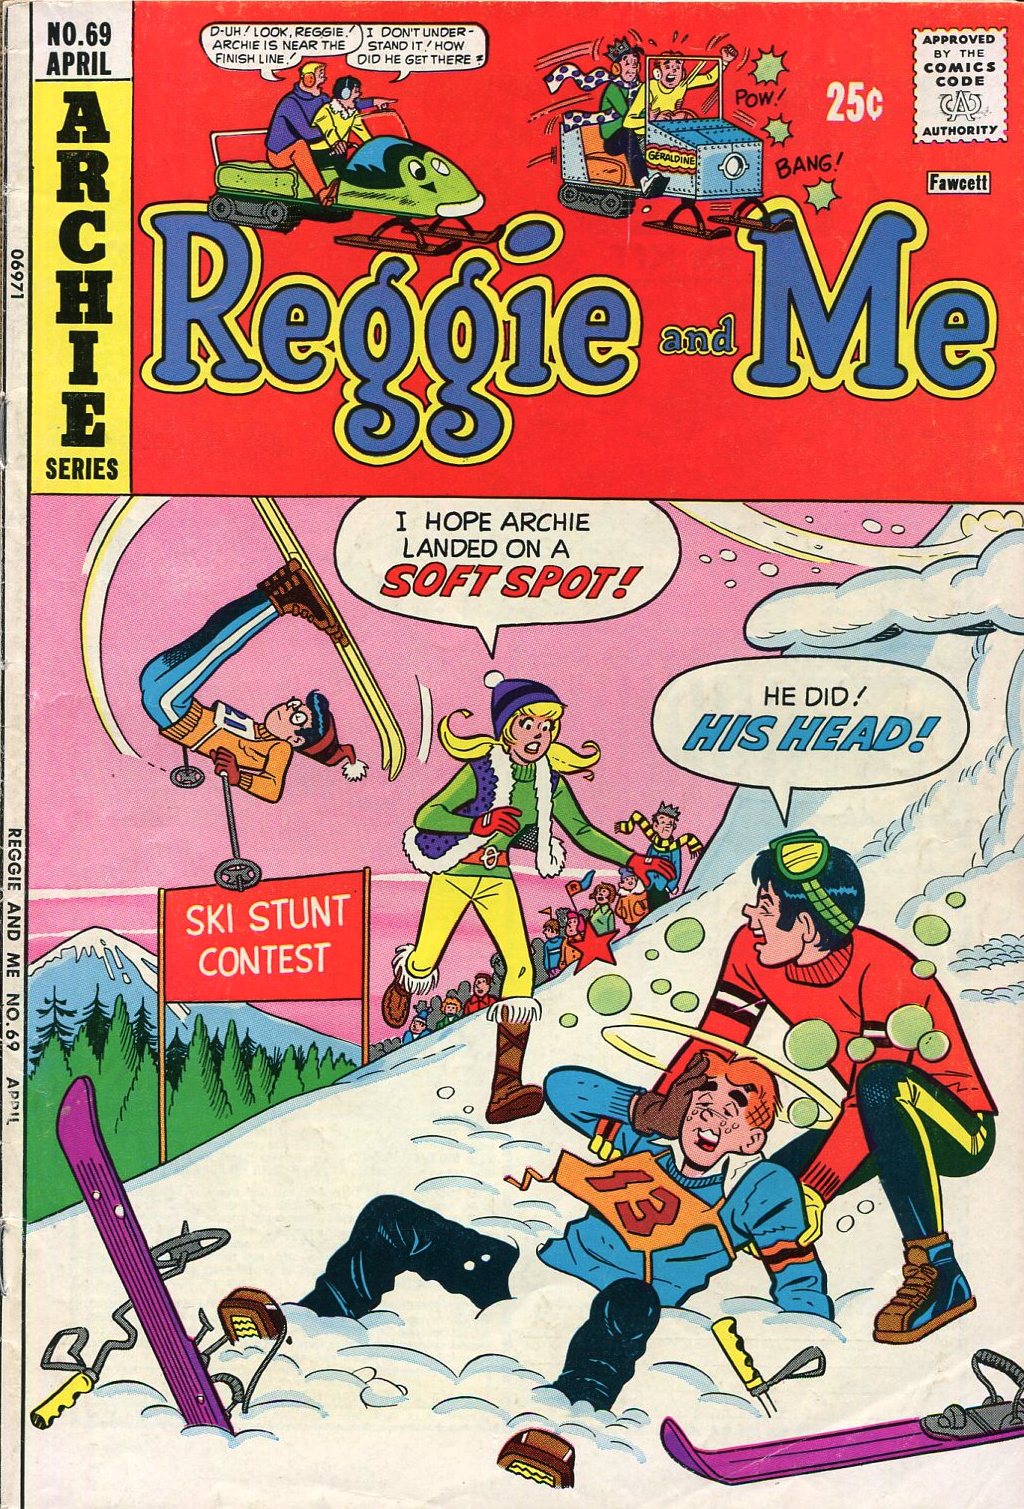 Read online Reggie and Me (1966) comic -  Issue #69 - 1